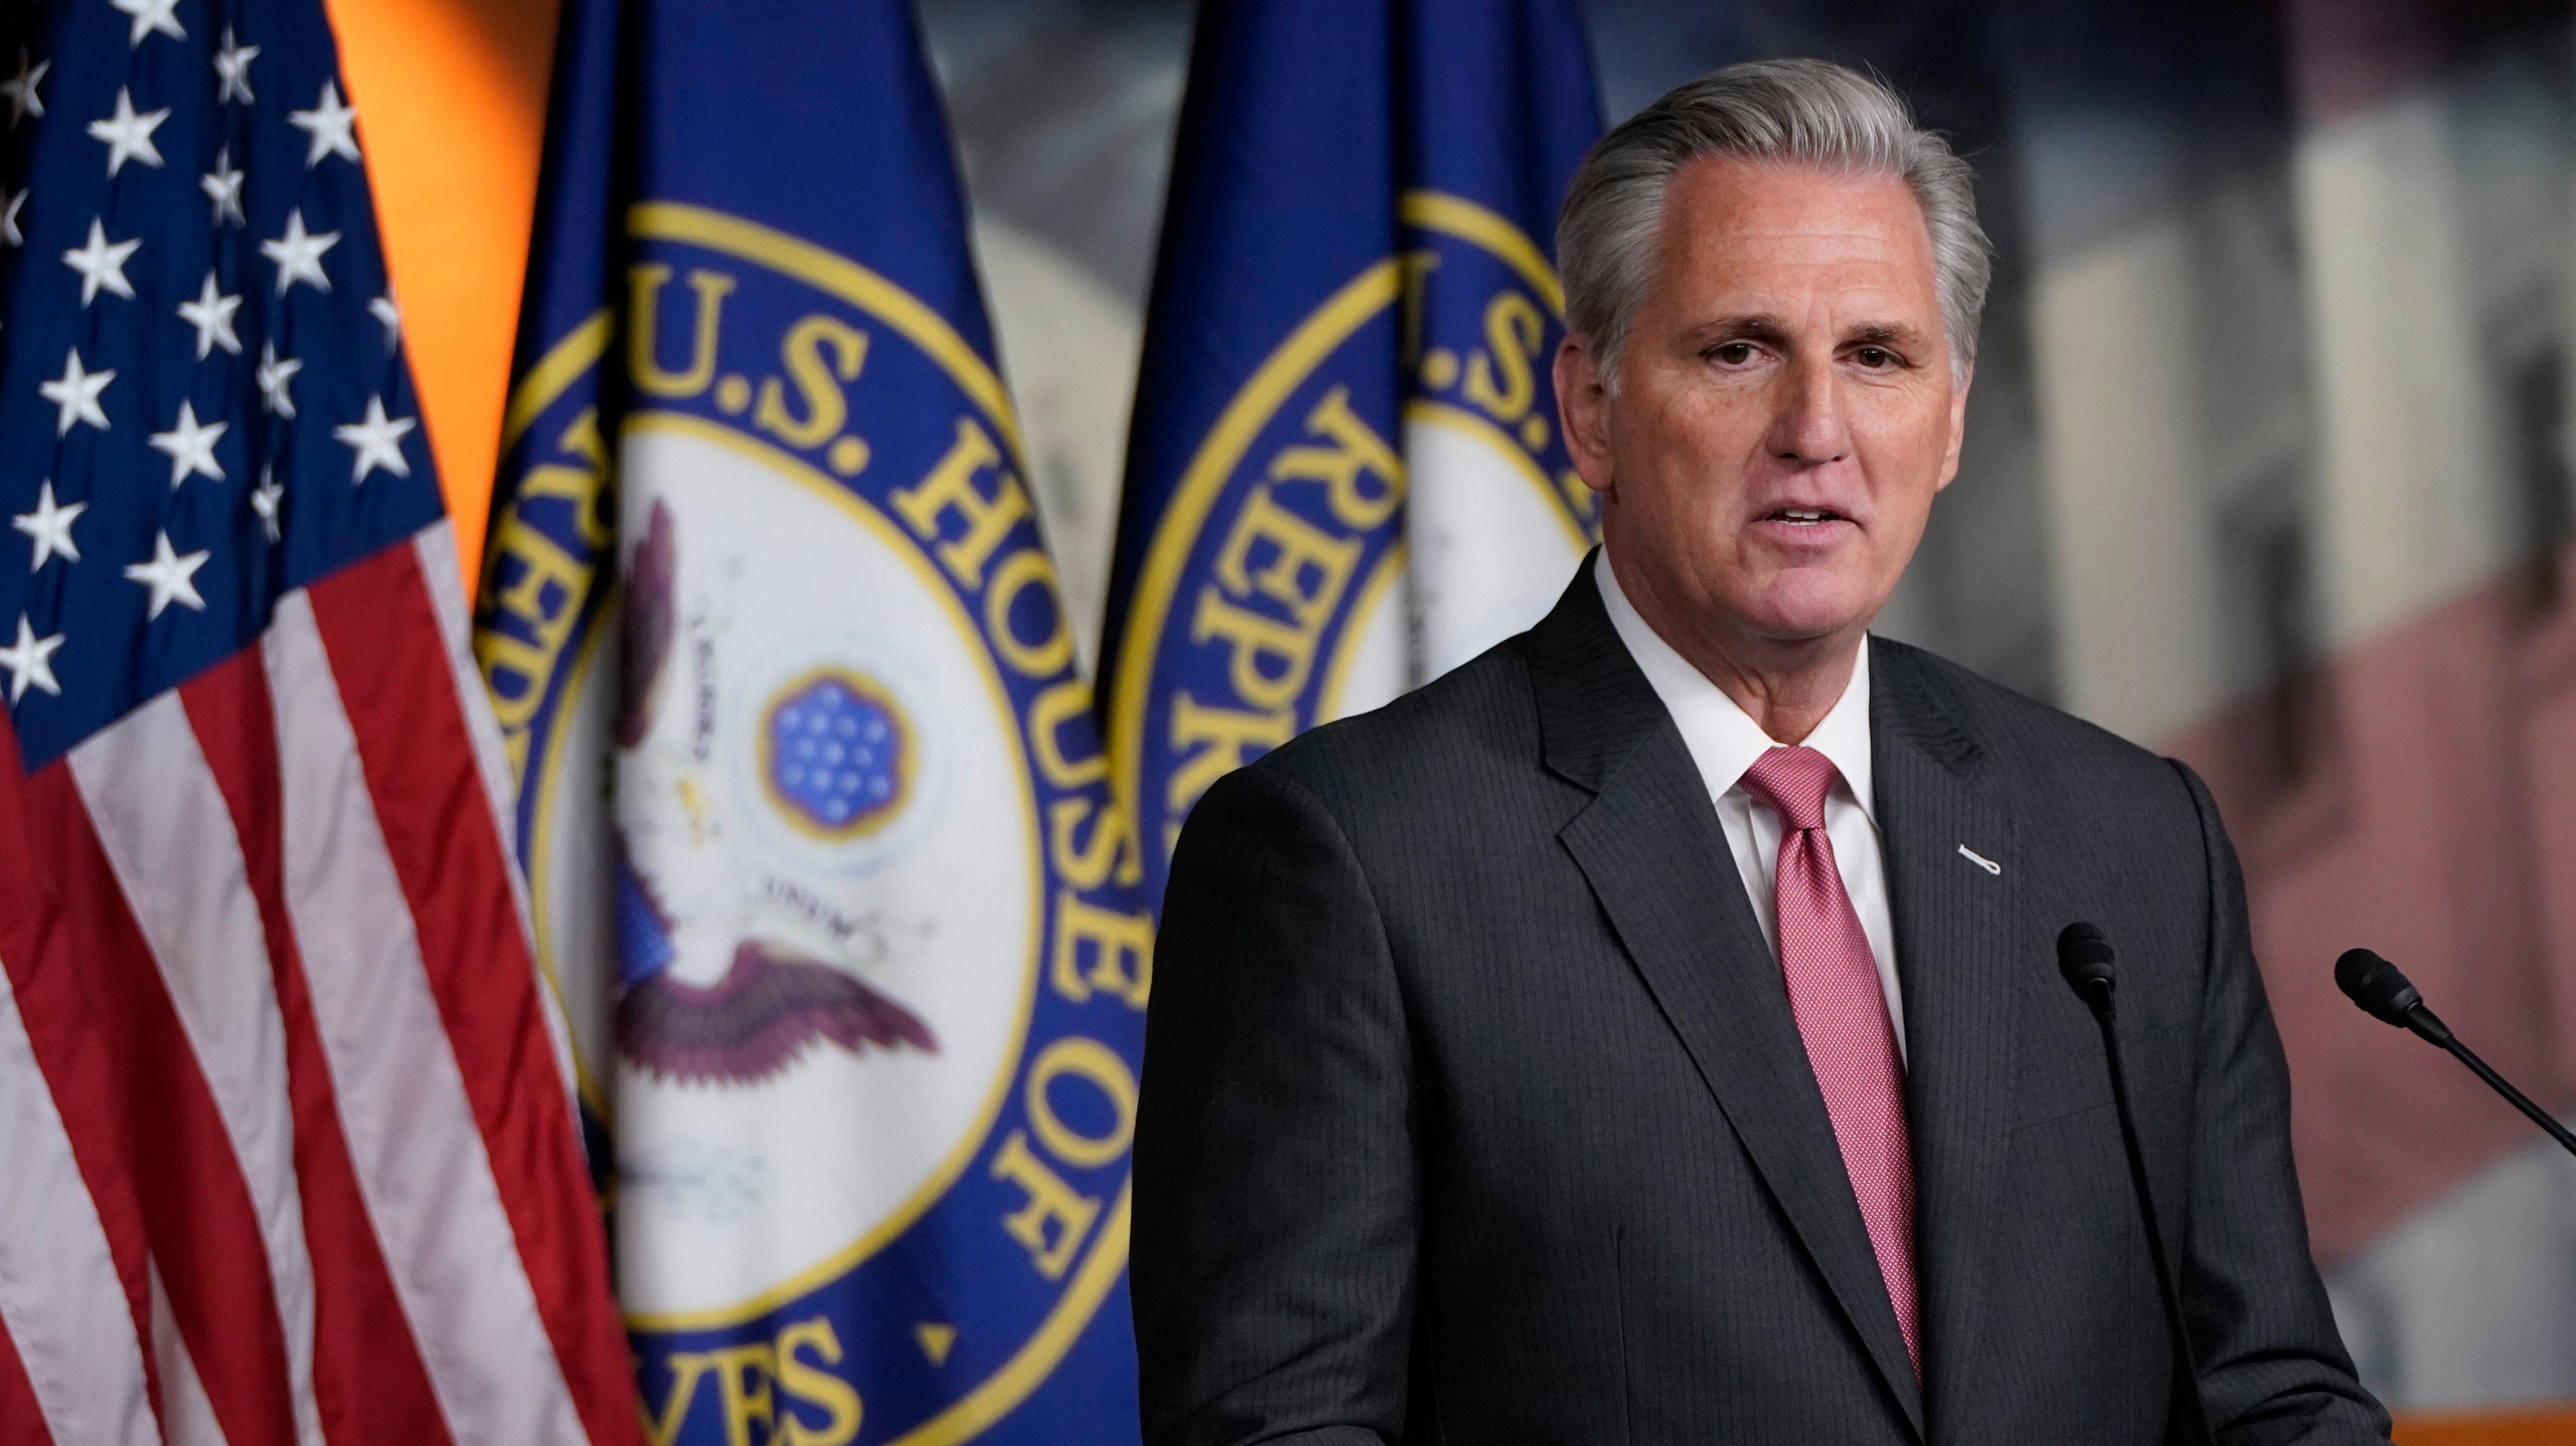 House Minority Leader McCarthy Holds Weekly Press Conference